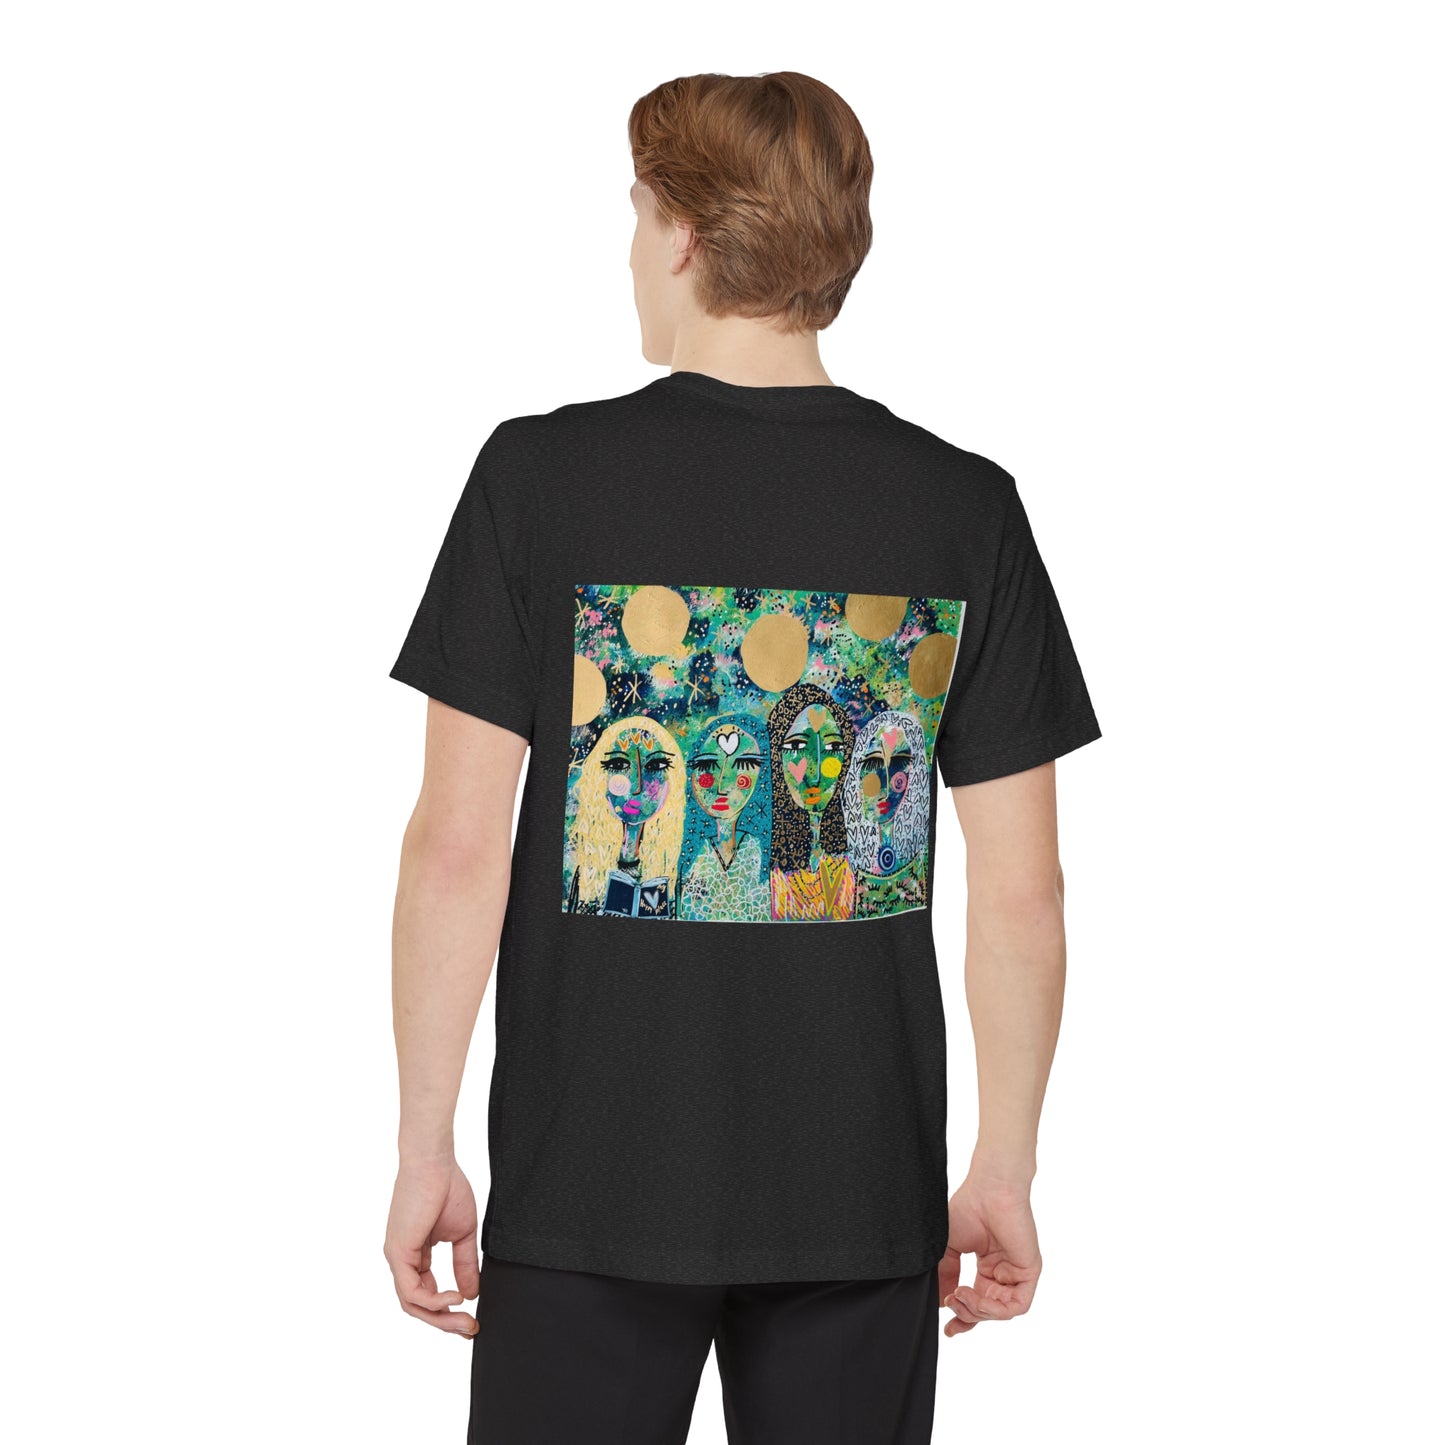 "The Witches" Unisex Pocket Tee